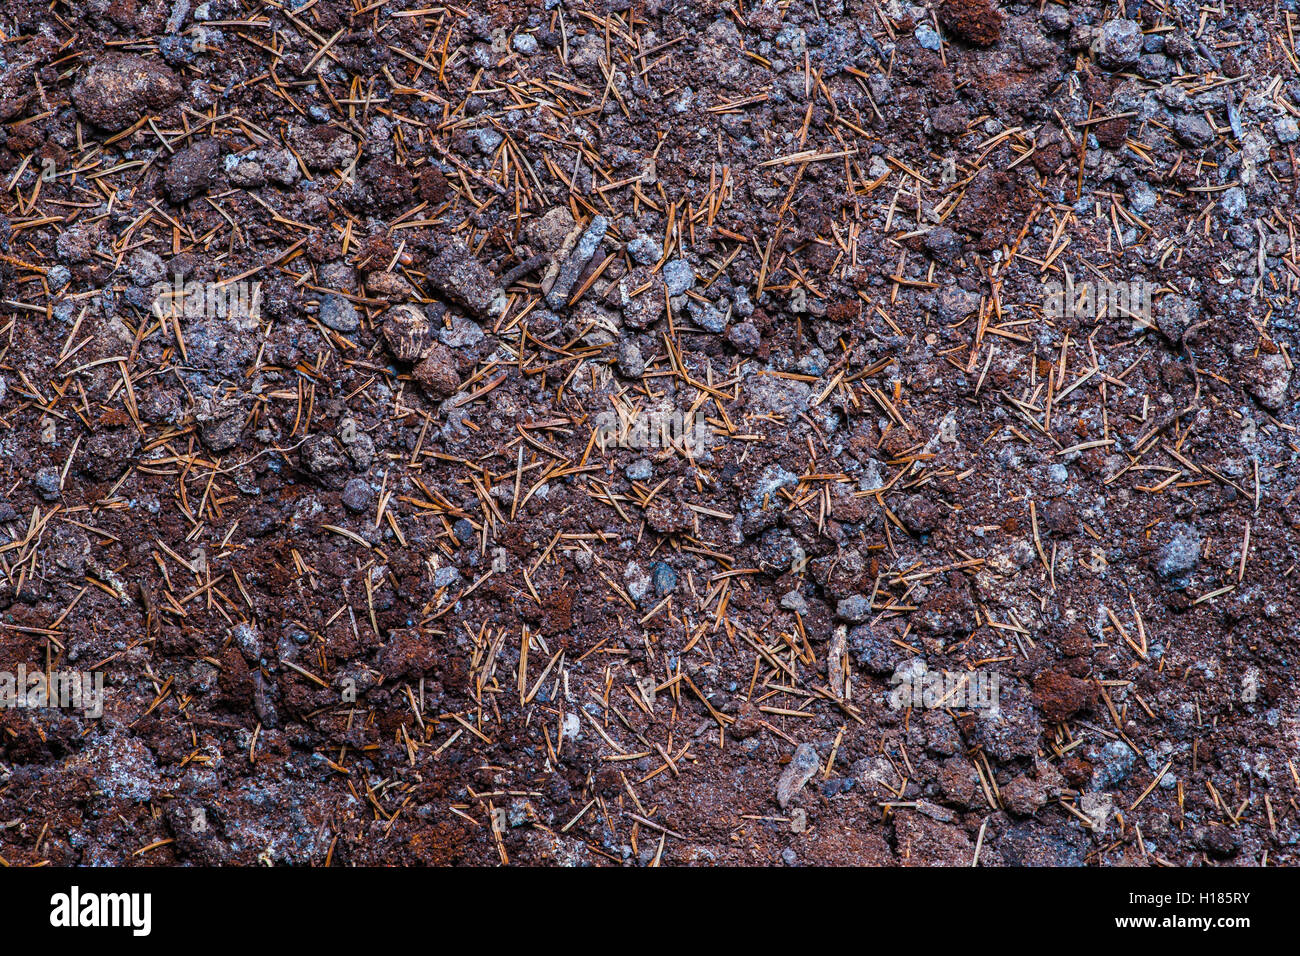 Black earth soil or humus covered with some spruce tree needles. Organic plant food. Closeup view. Stock Photo